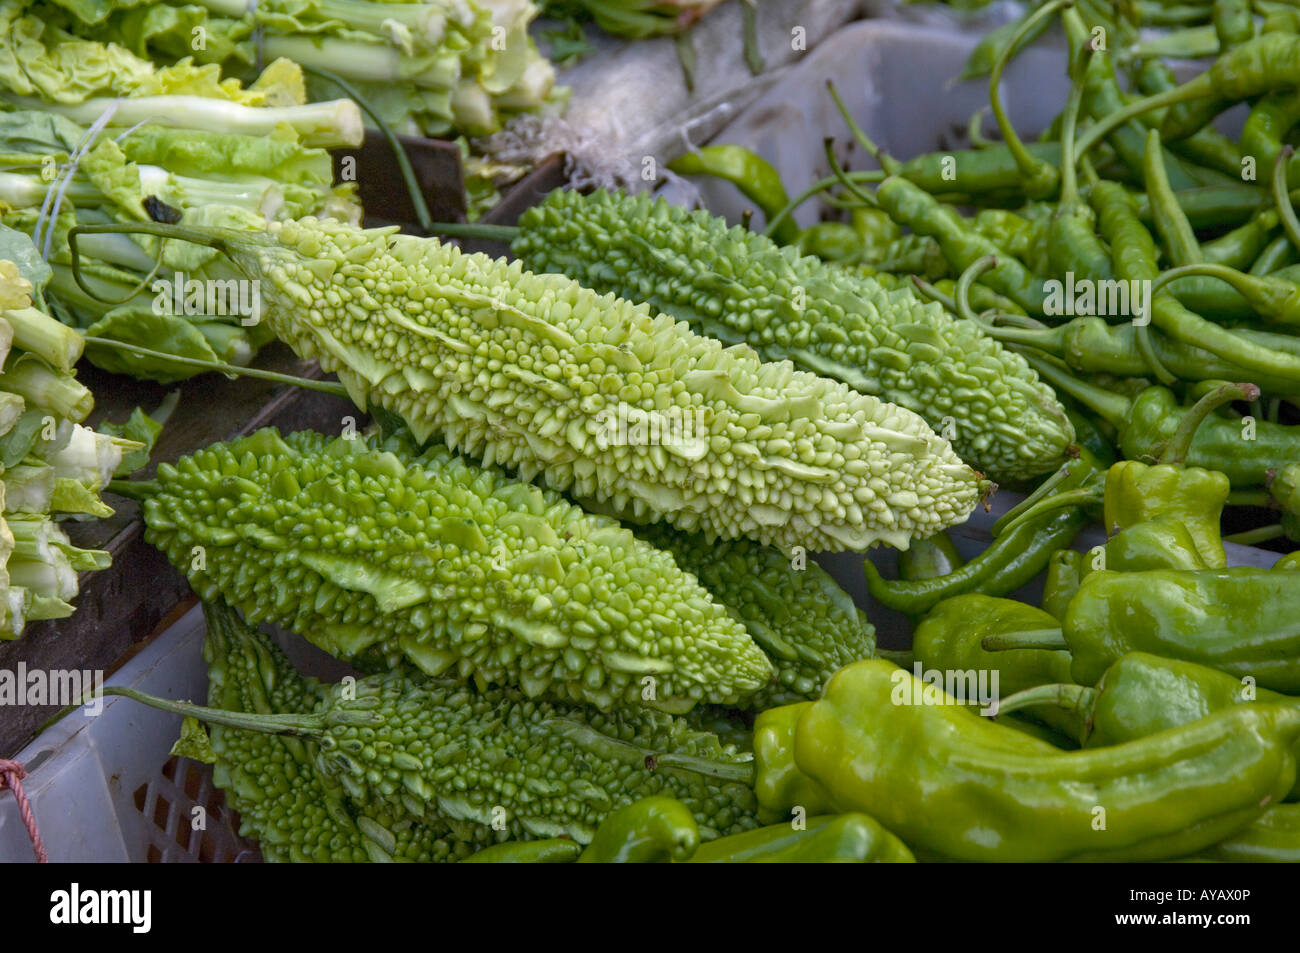 Bitter melons or bitter cucumbers Momordica charantia in Chinese market Stock Photo